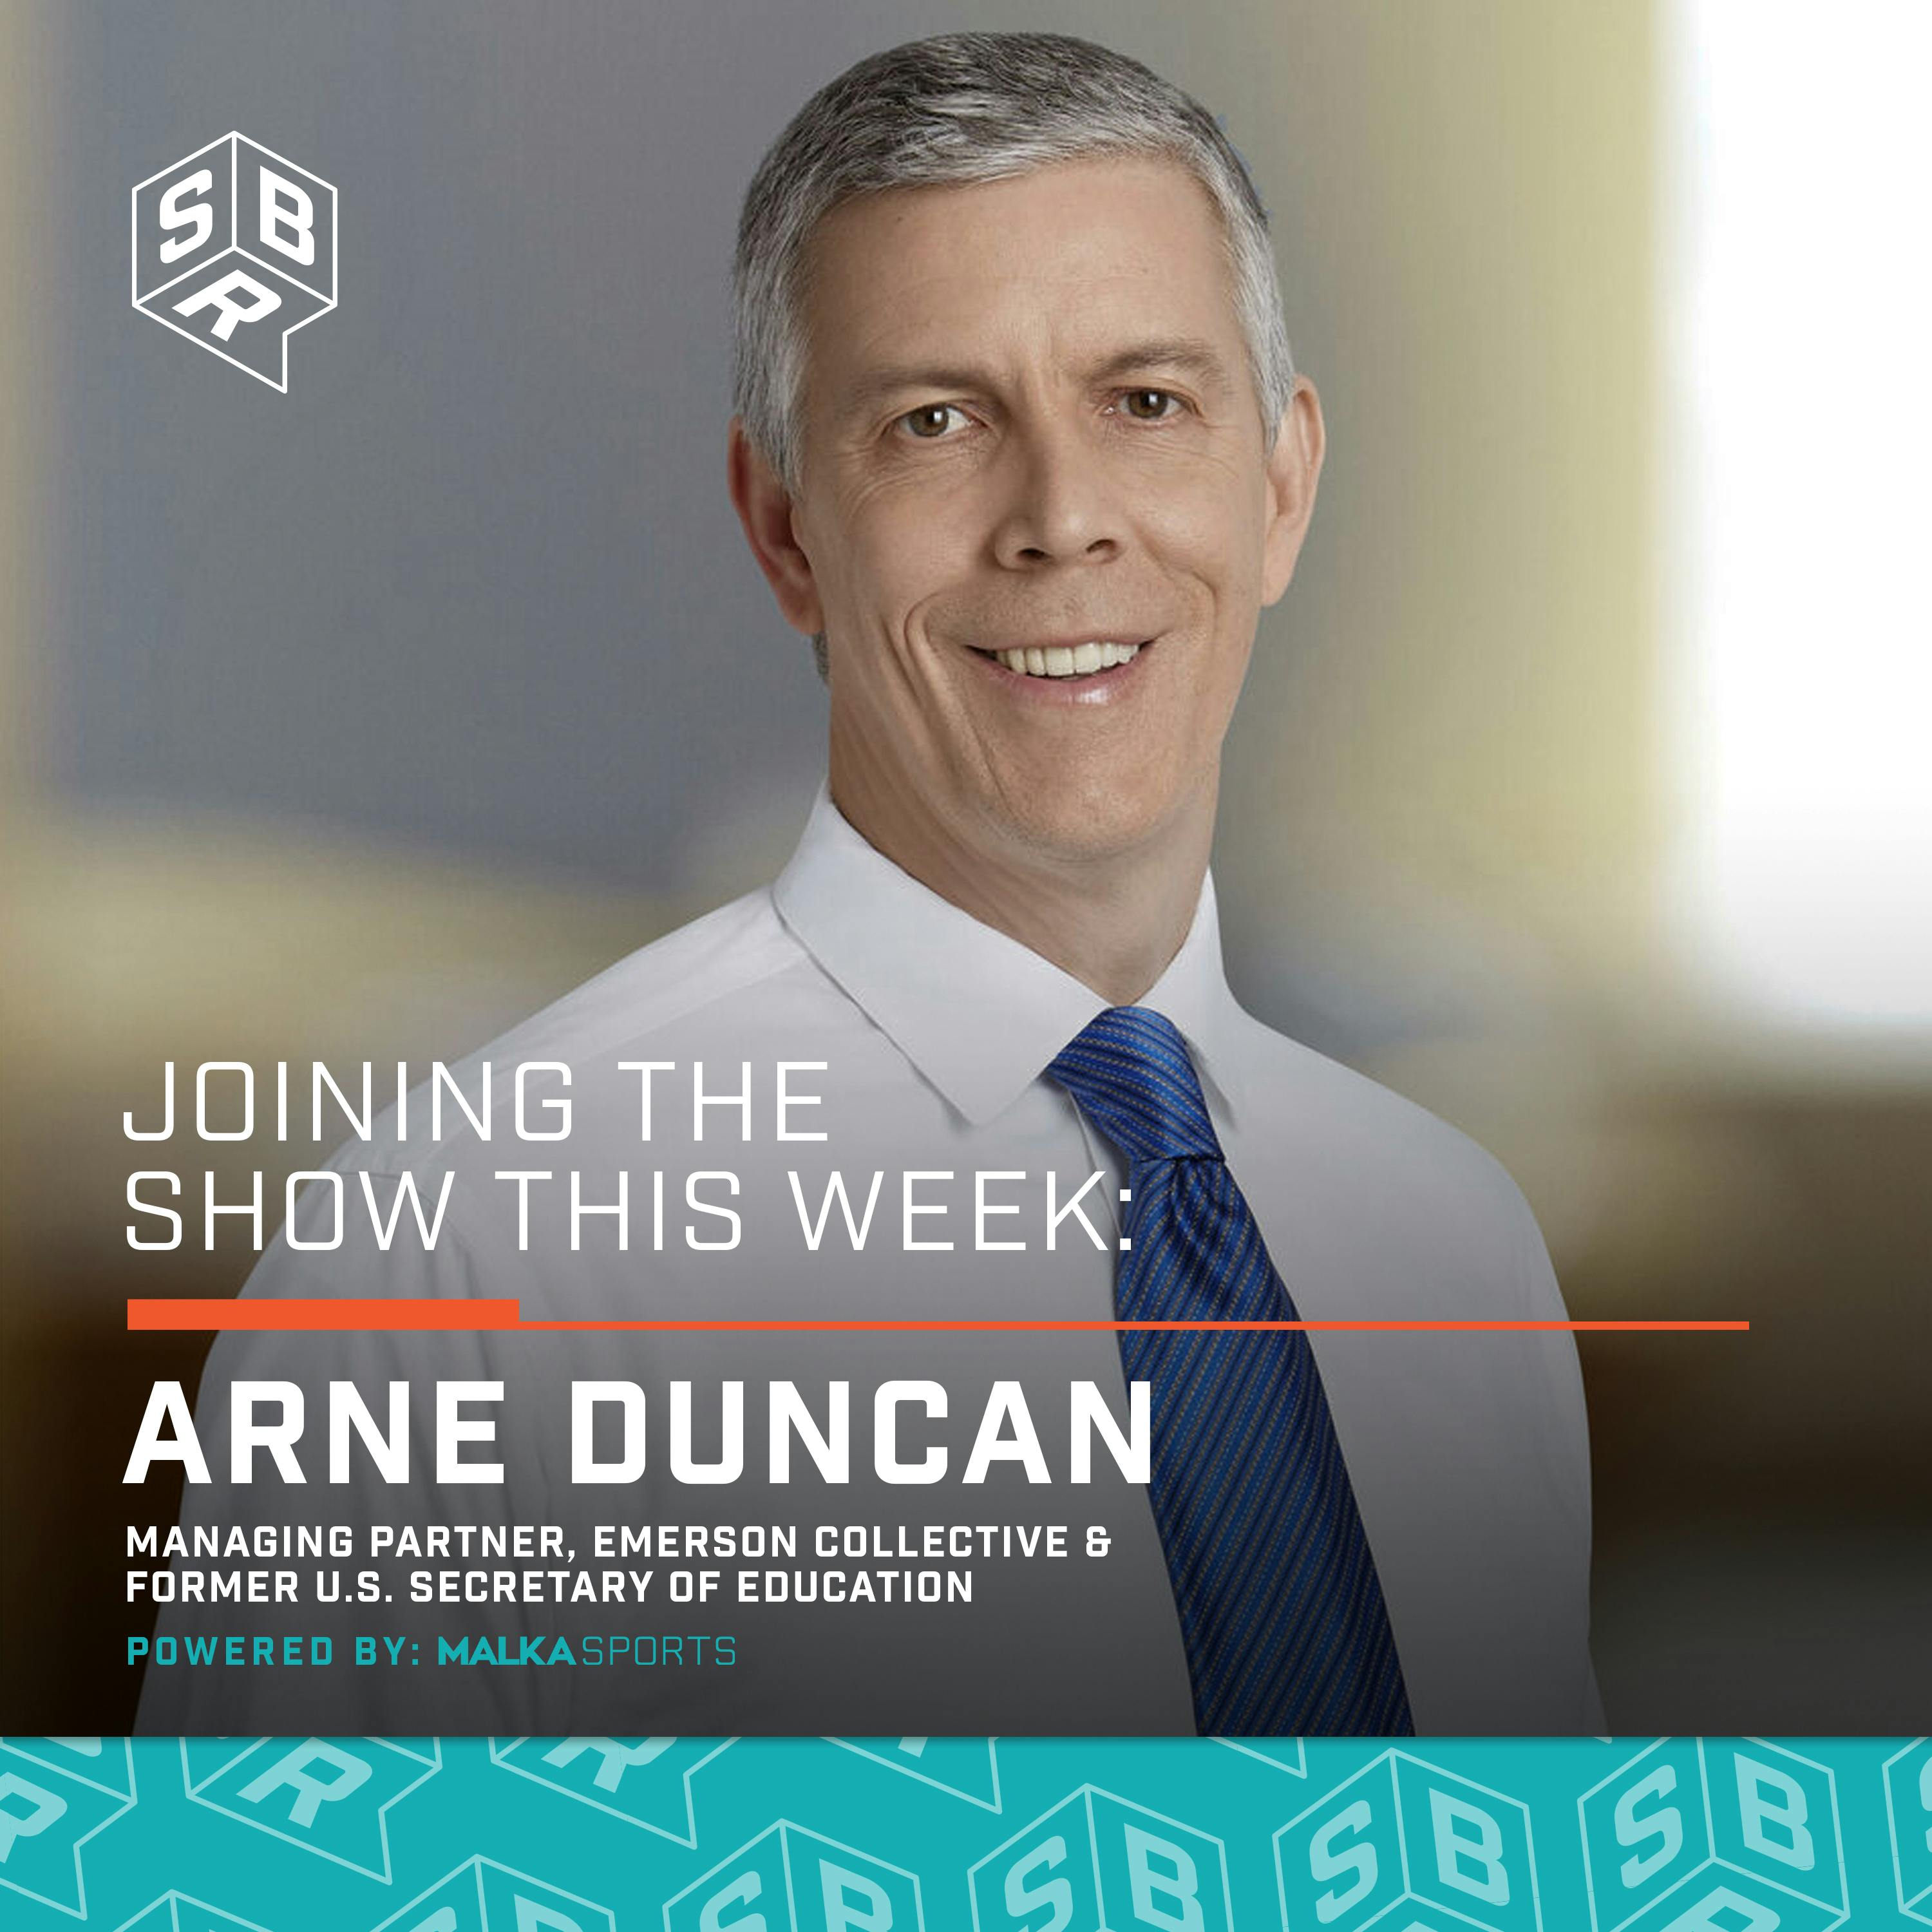 Arne Duncan - Knight Commission Co-Chair & Former U.S. Secretary of Education